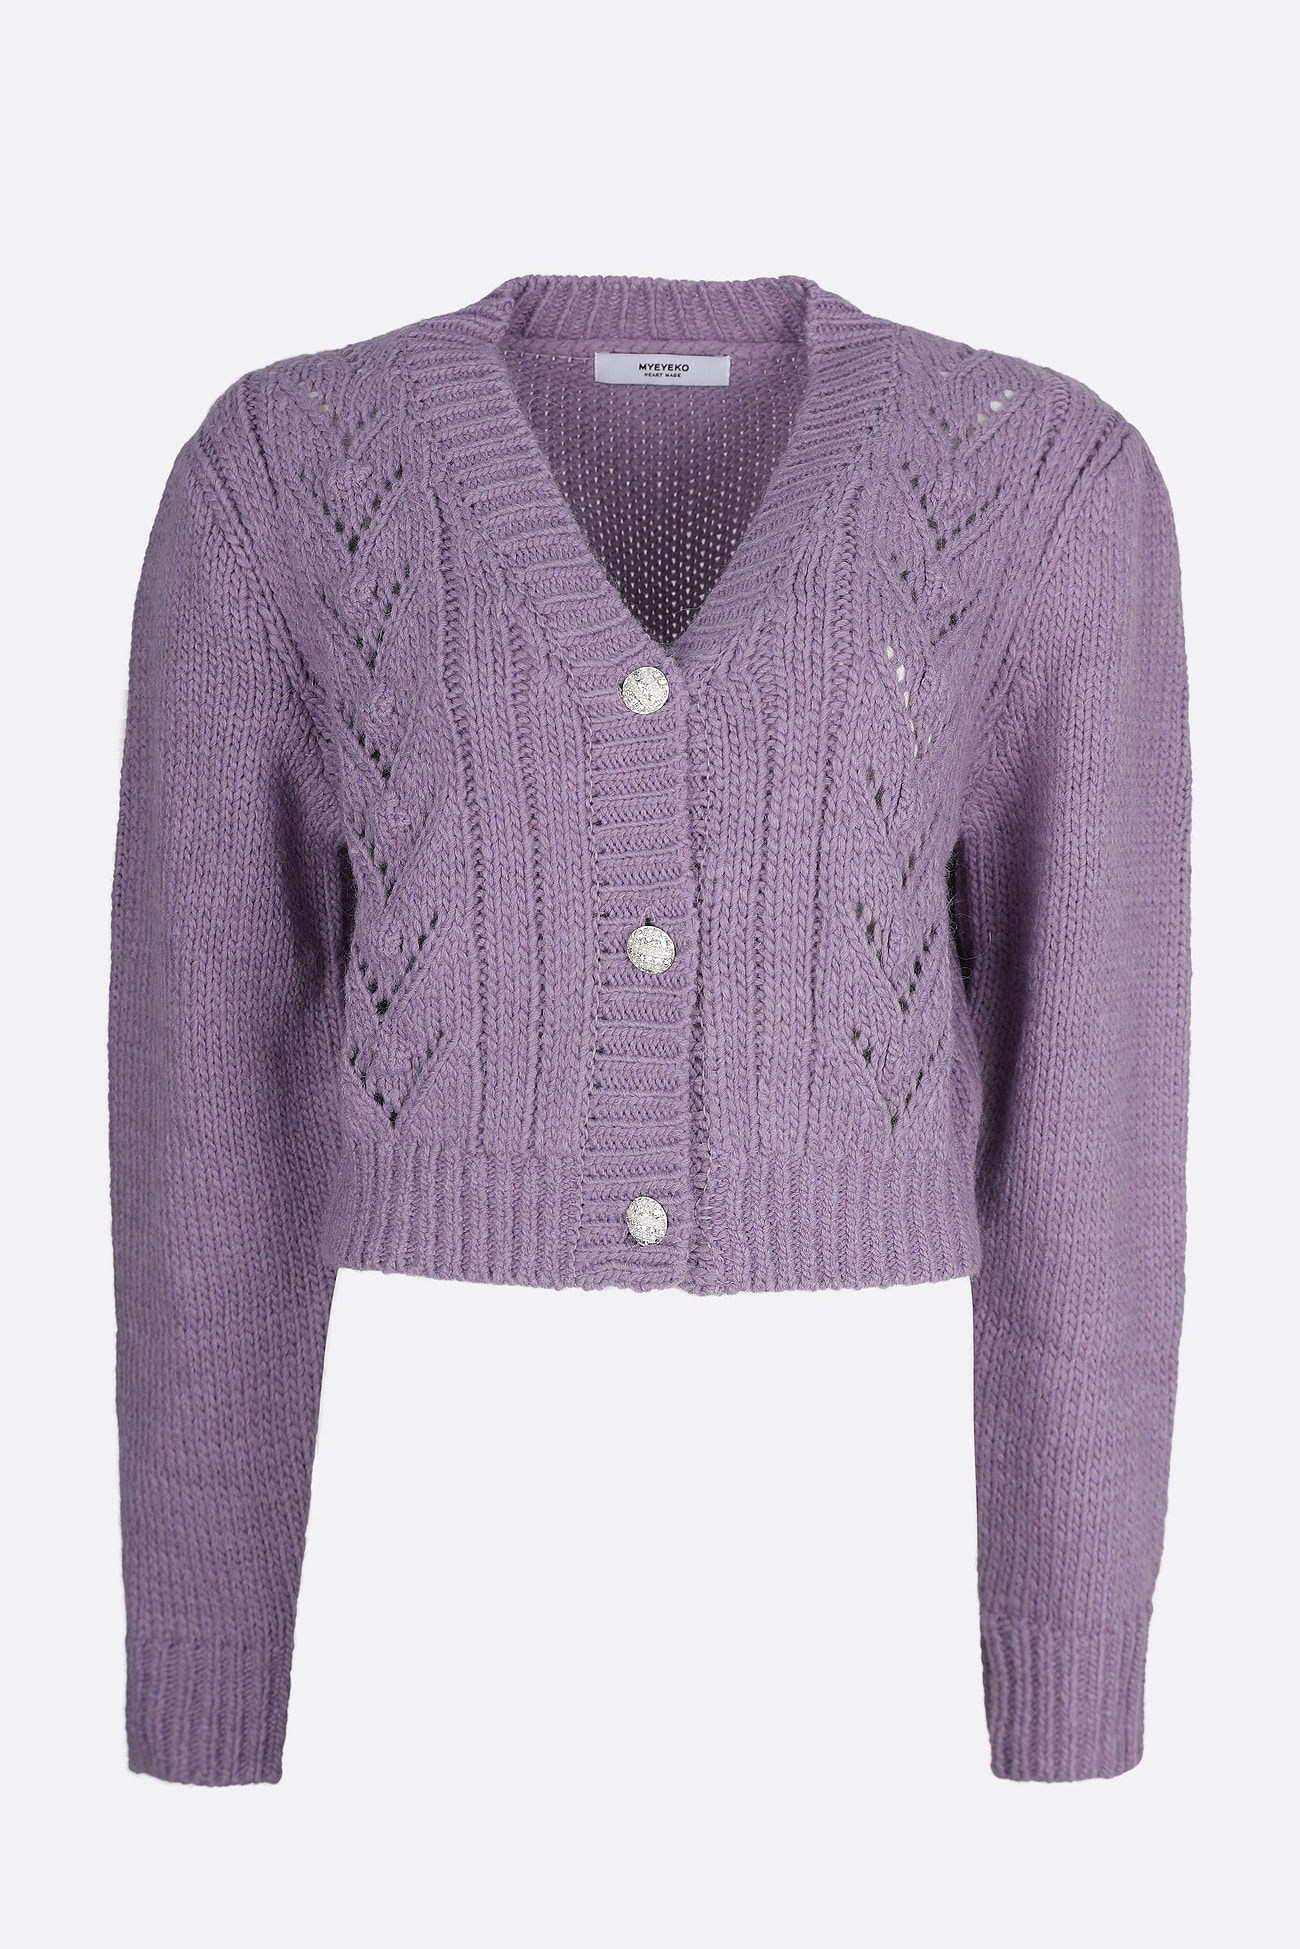 HIGH QUALITY LINE - Pearl-Embellished KNIT Cardigan (PINORI FILATI from italy) VIOLET